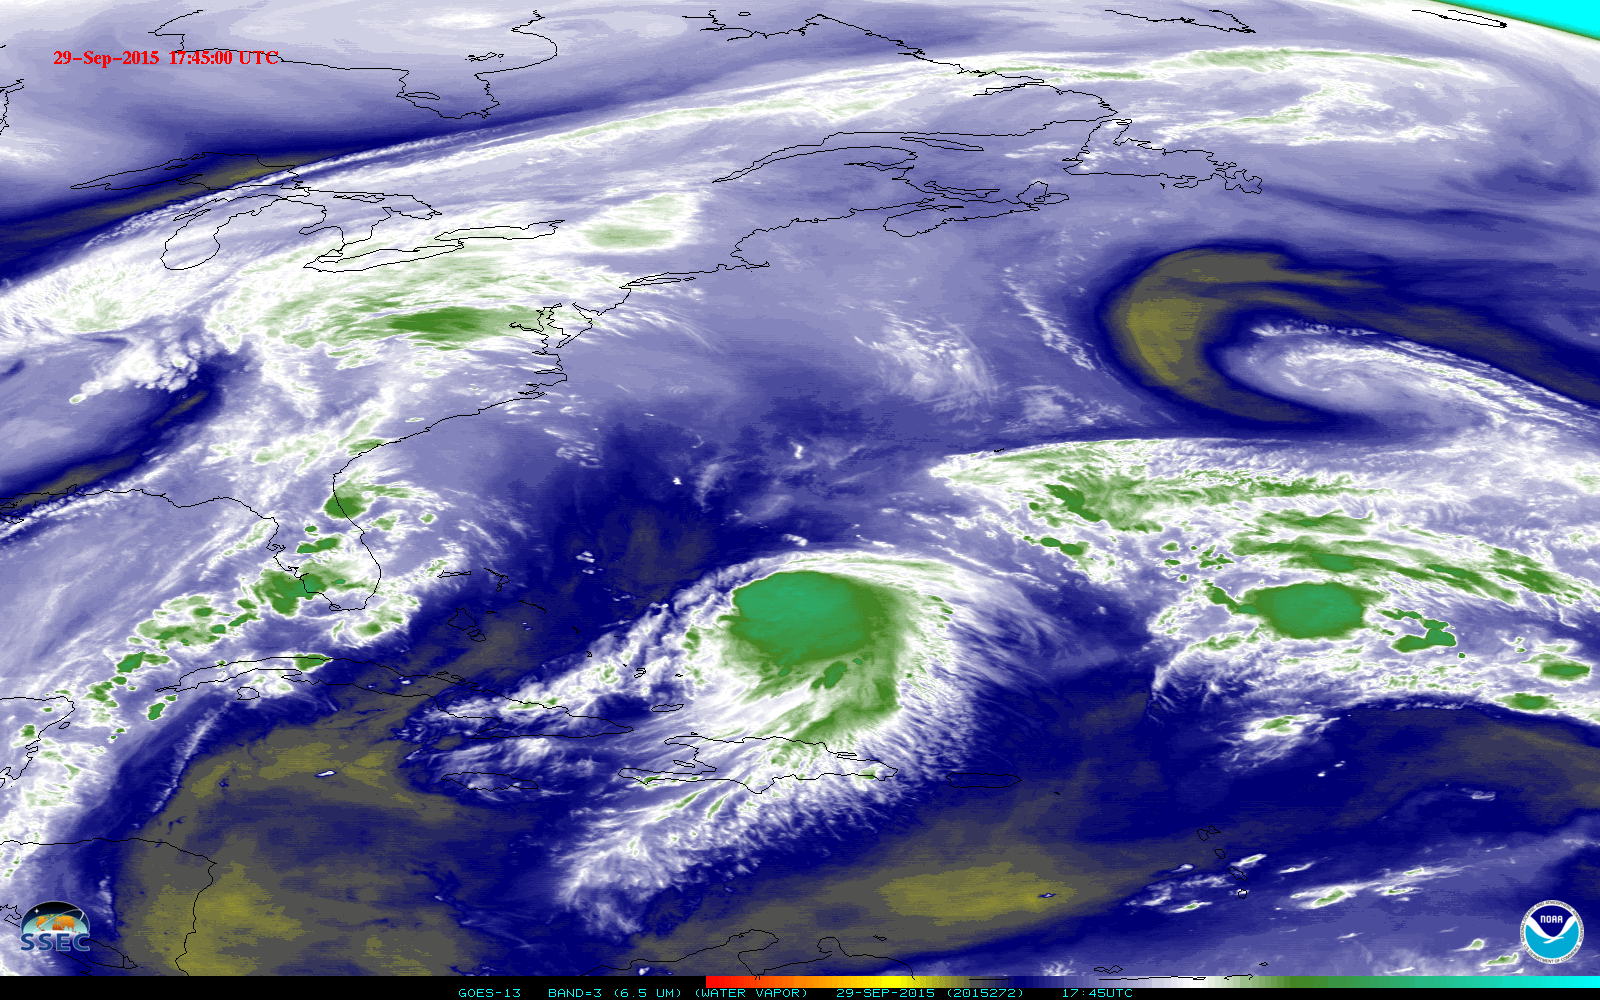 GOES-13 Water Vapor Infrared (6.5 µm) Imagery [click to Play Animation]